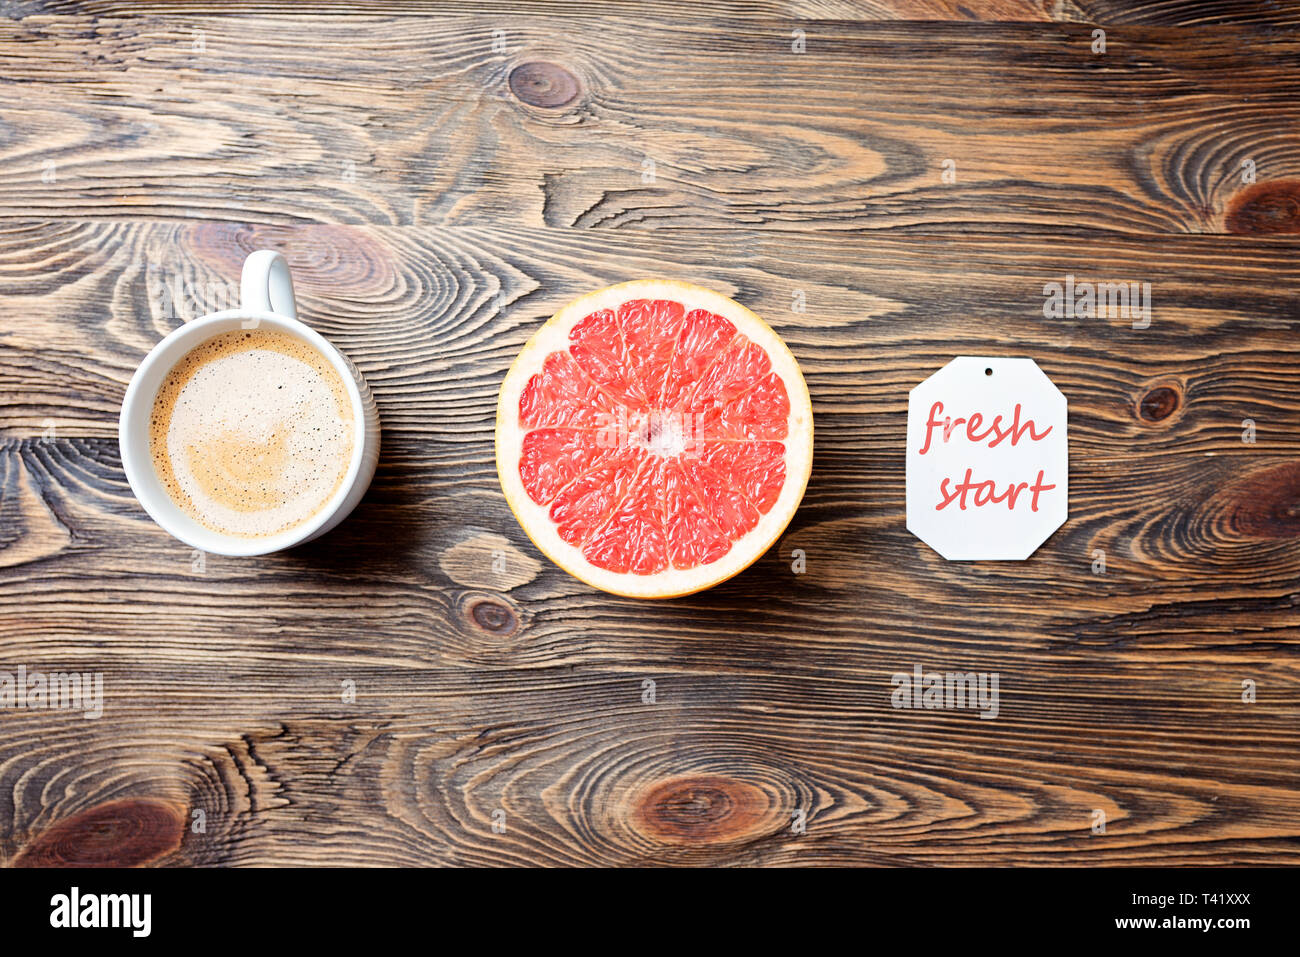 Cheerful start. Coffee, grapefruit, reminder. Concept, top view Stock Photo